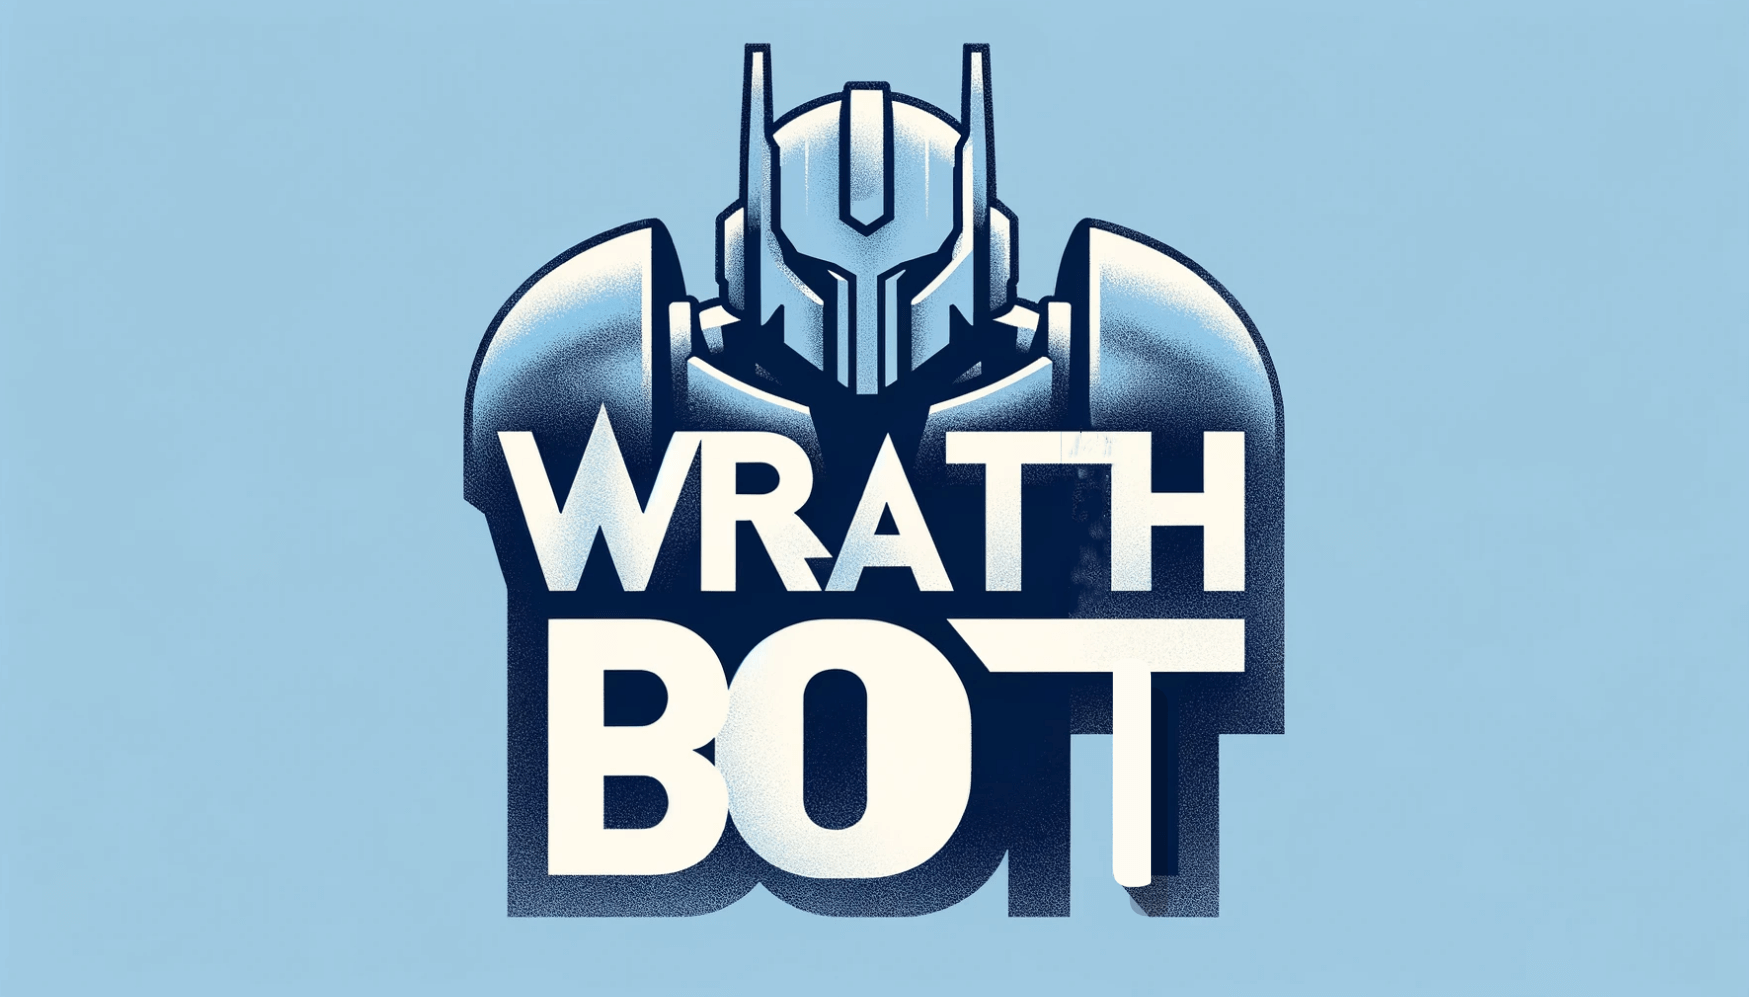 Main Features of Wrath Bot